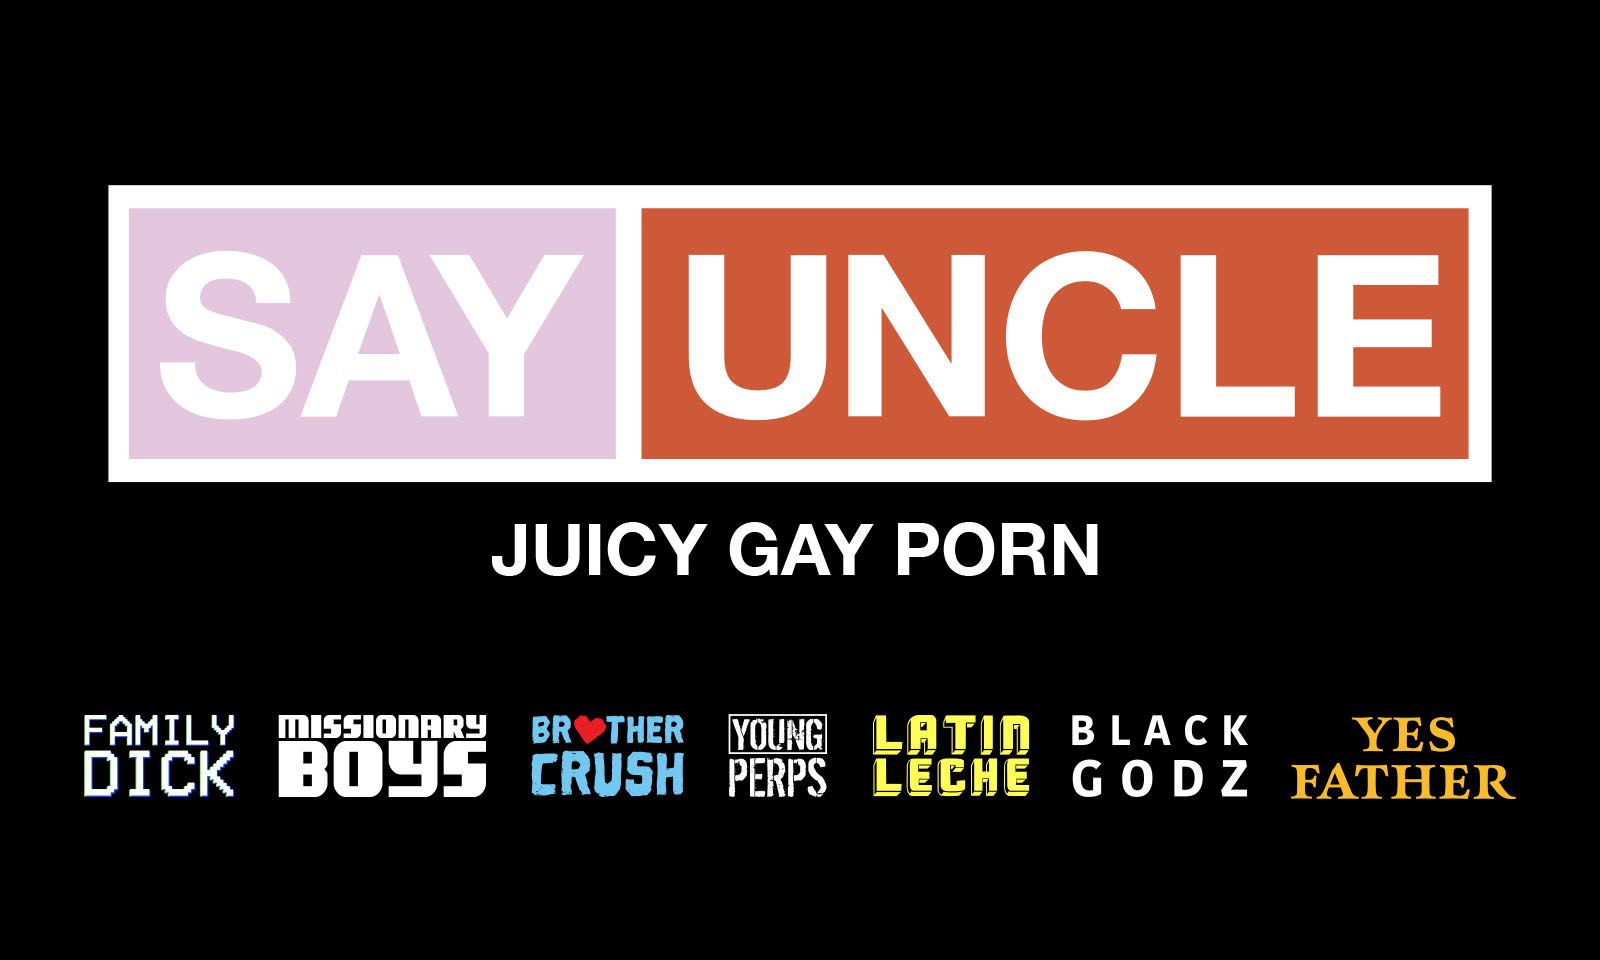 New Gay Porn Network Say Uncle Makes Its Debut